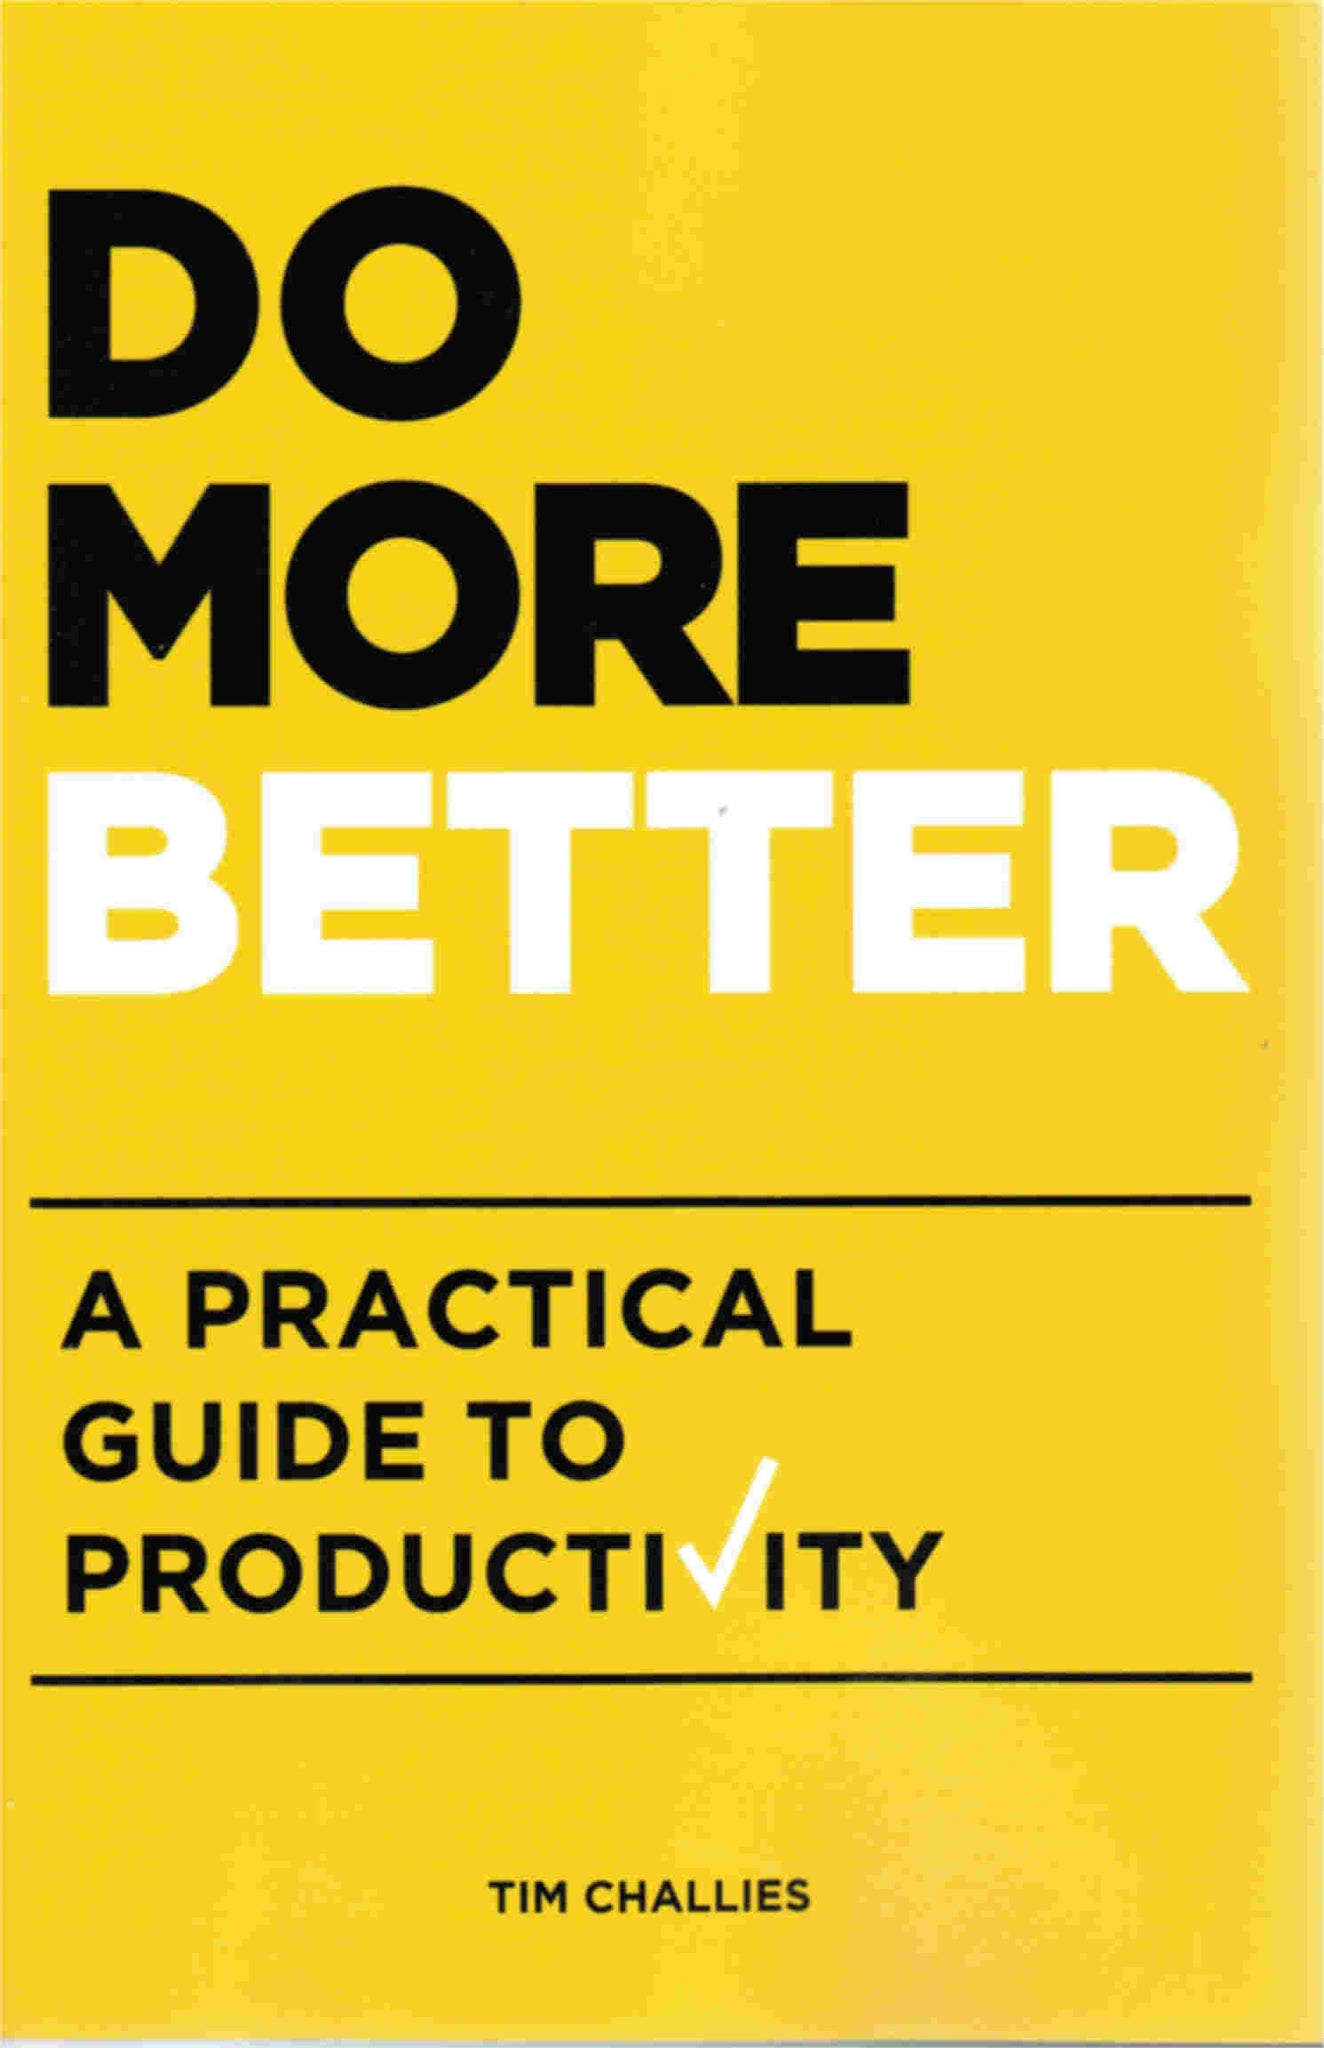 Do More Better: A Practical Guide to Productivity